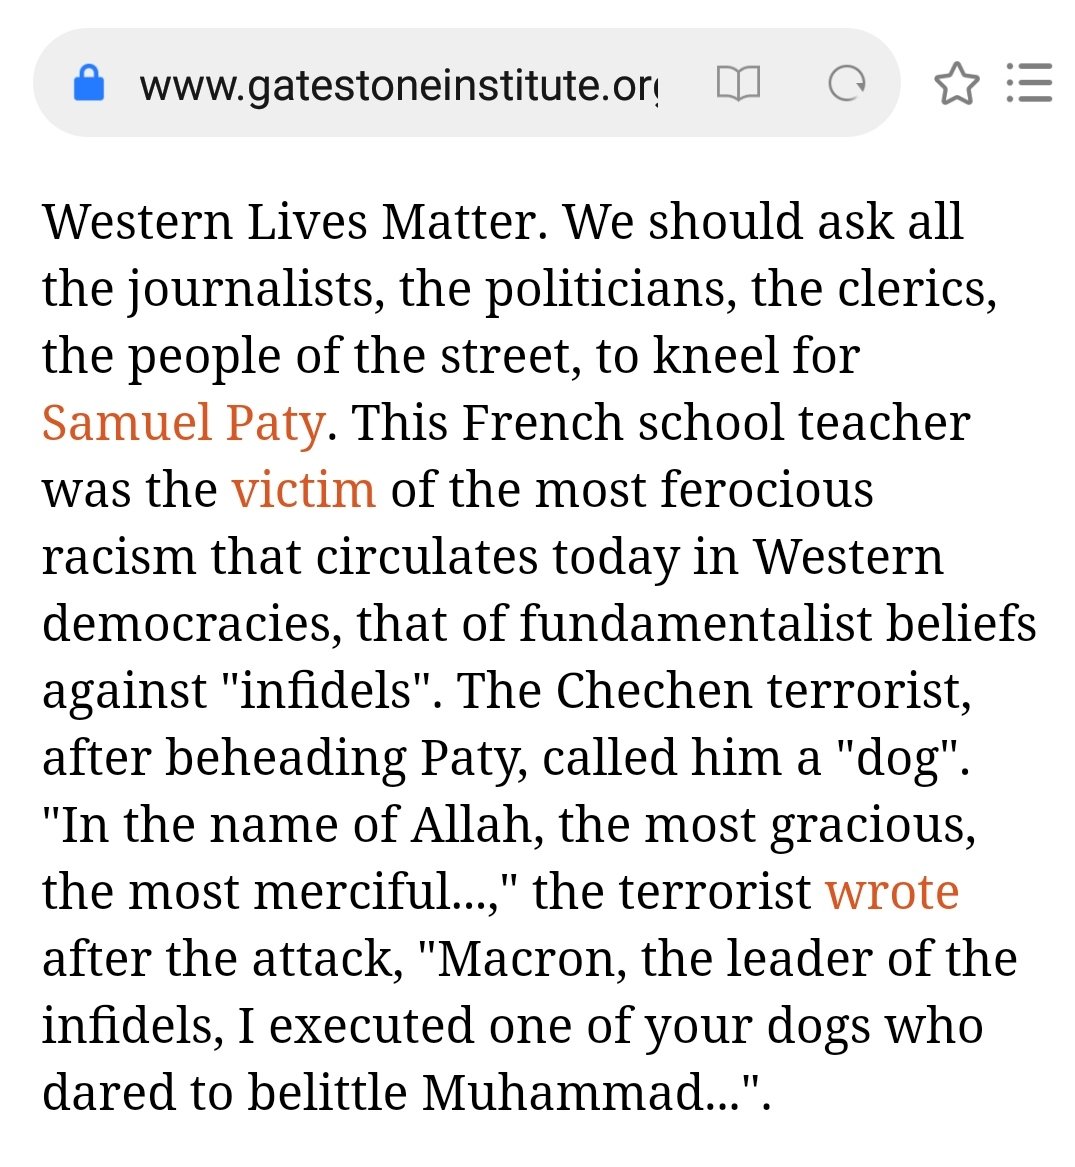 Western Lives MatterWe should ask all the journalists, the politicians, the clerics, the people of the street, to kneel for Samuel PatyHe was the victim of the most ferocious racism that circulates todayin Western democracies,that of fundamentalist beliefs against "infidels"